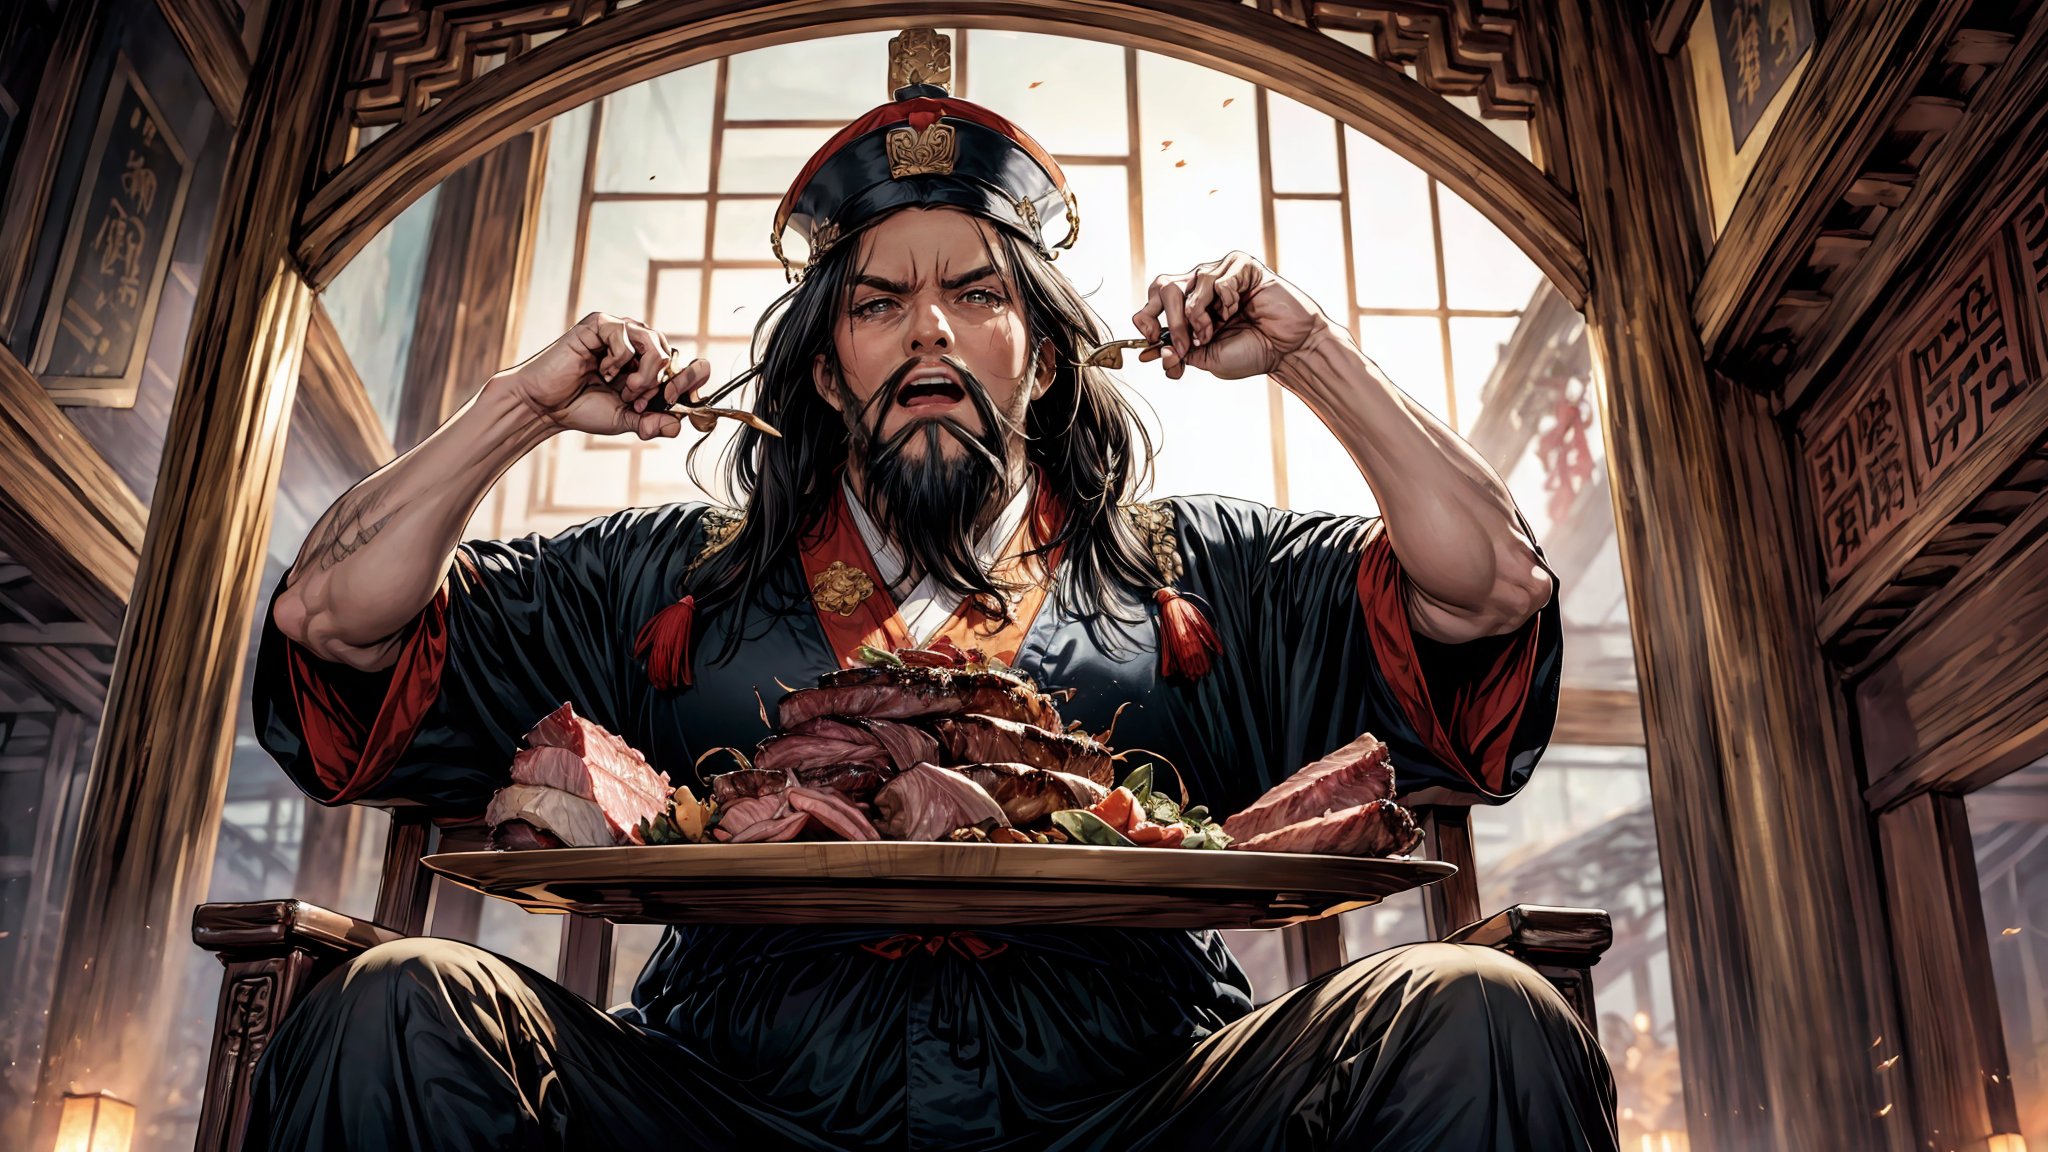 boichi manga style, one old man, a Chinese emperor, sitting in a throne chair, eating meat, evil face, long beard long, black hair, scar on left eye, angry face, flesh_fang, (tall, fat), full_body, from below, straight crown, golden Taoist robe, Chinese palace background, royal, dynamic poses, ((masterpiece))
